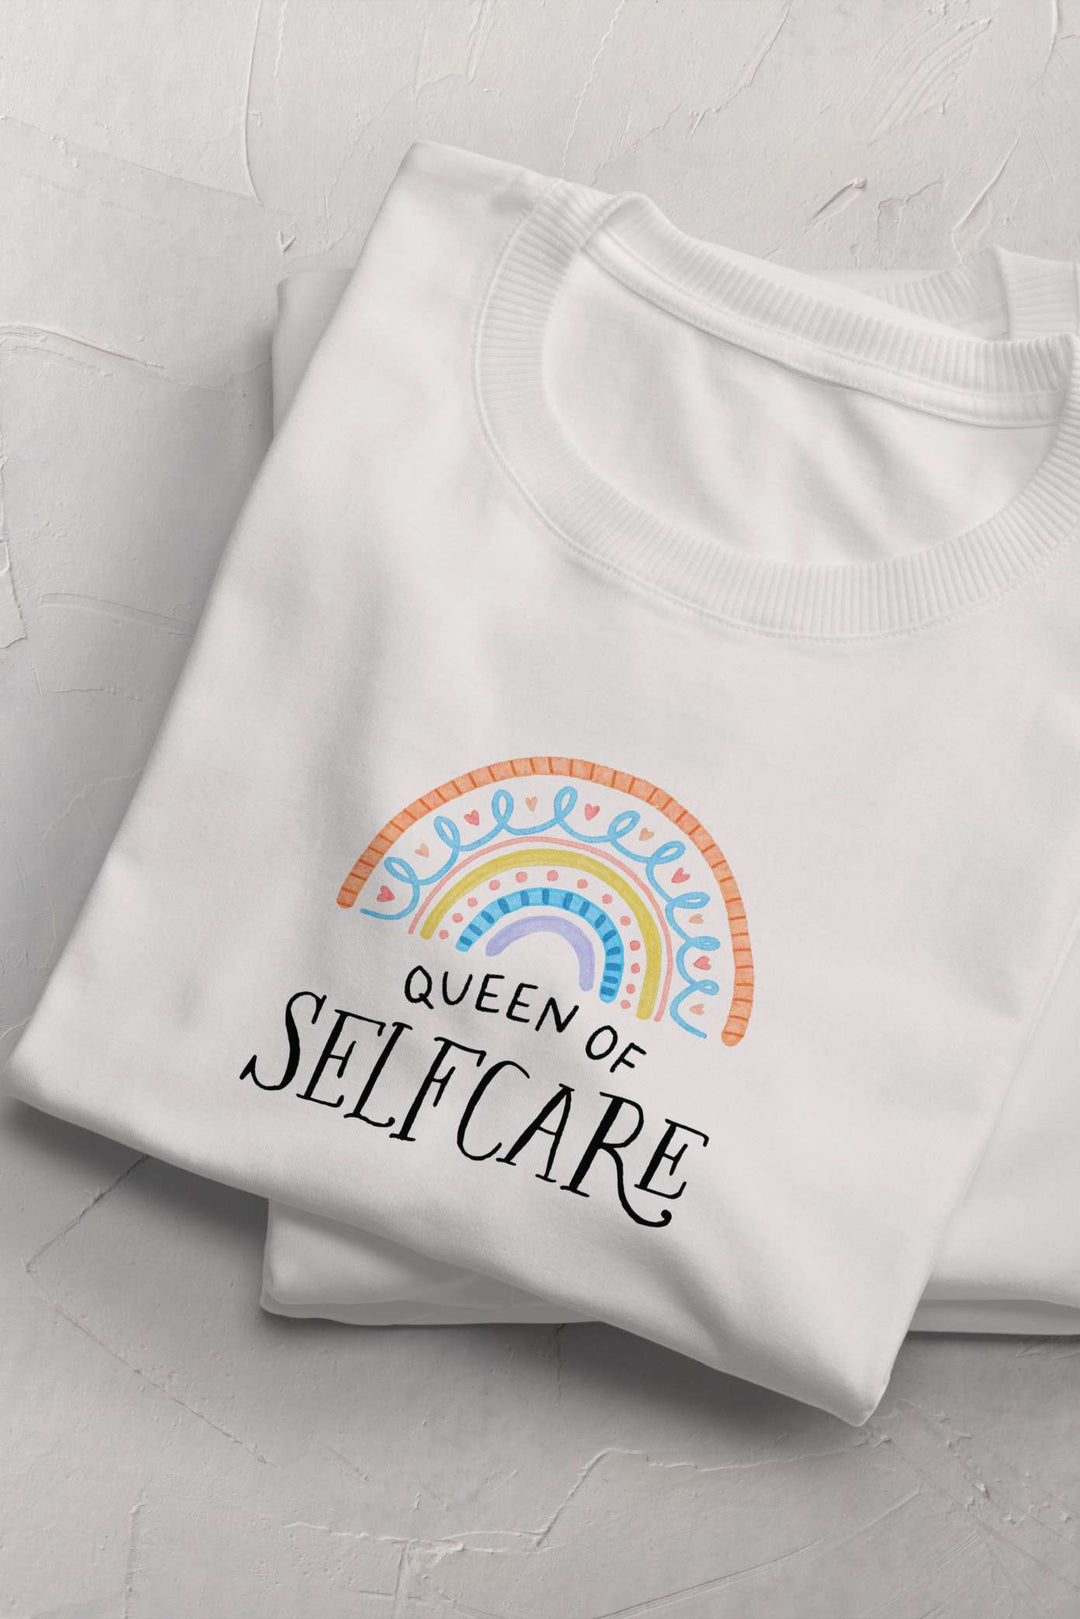 Selfcare T-shirt